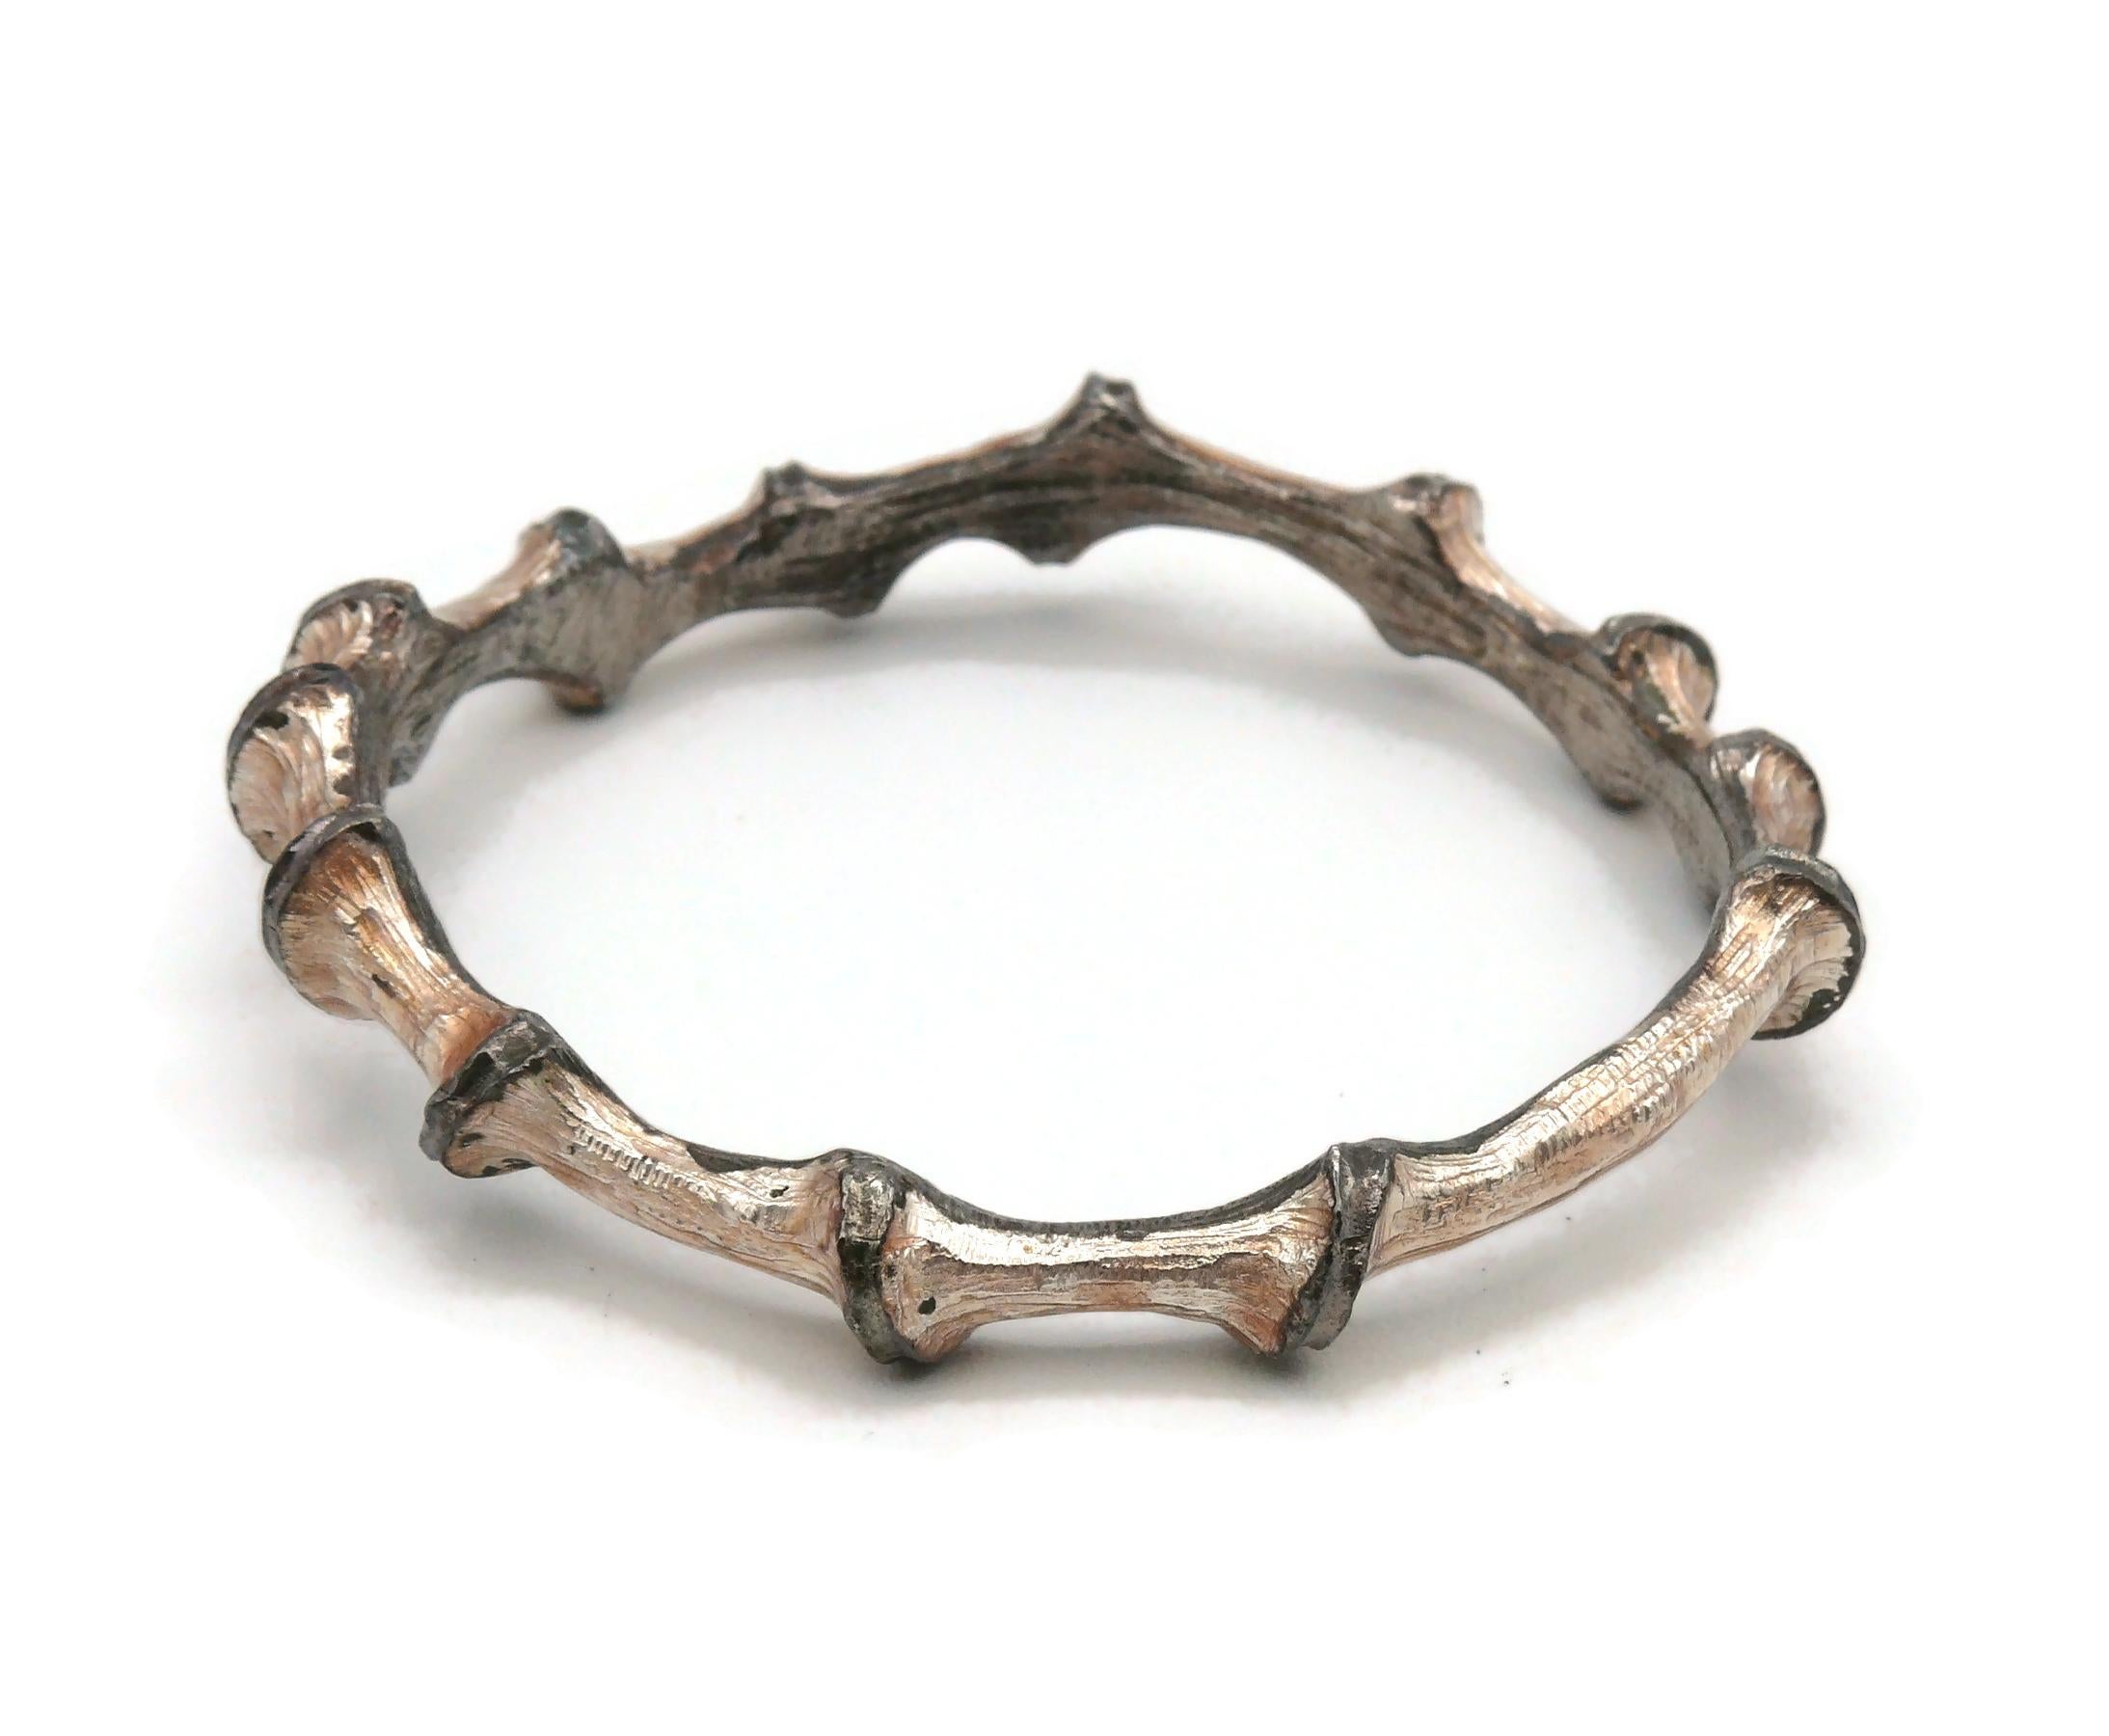 CHRISTIAN LACROIX Attributed To Vintage Distressed Bamboo Design Bangle Bracelet For Sale 2